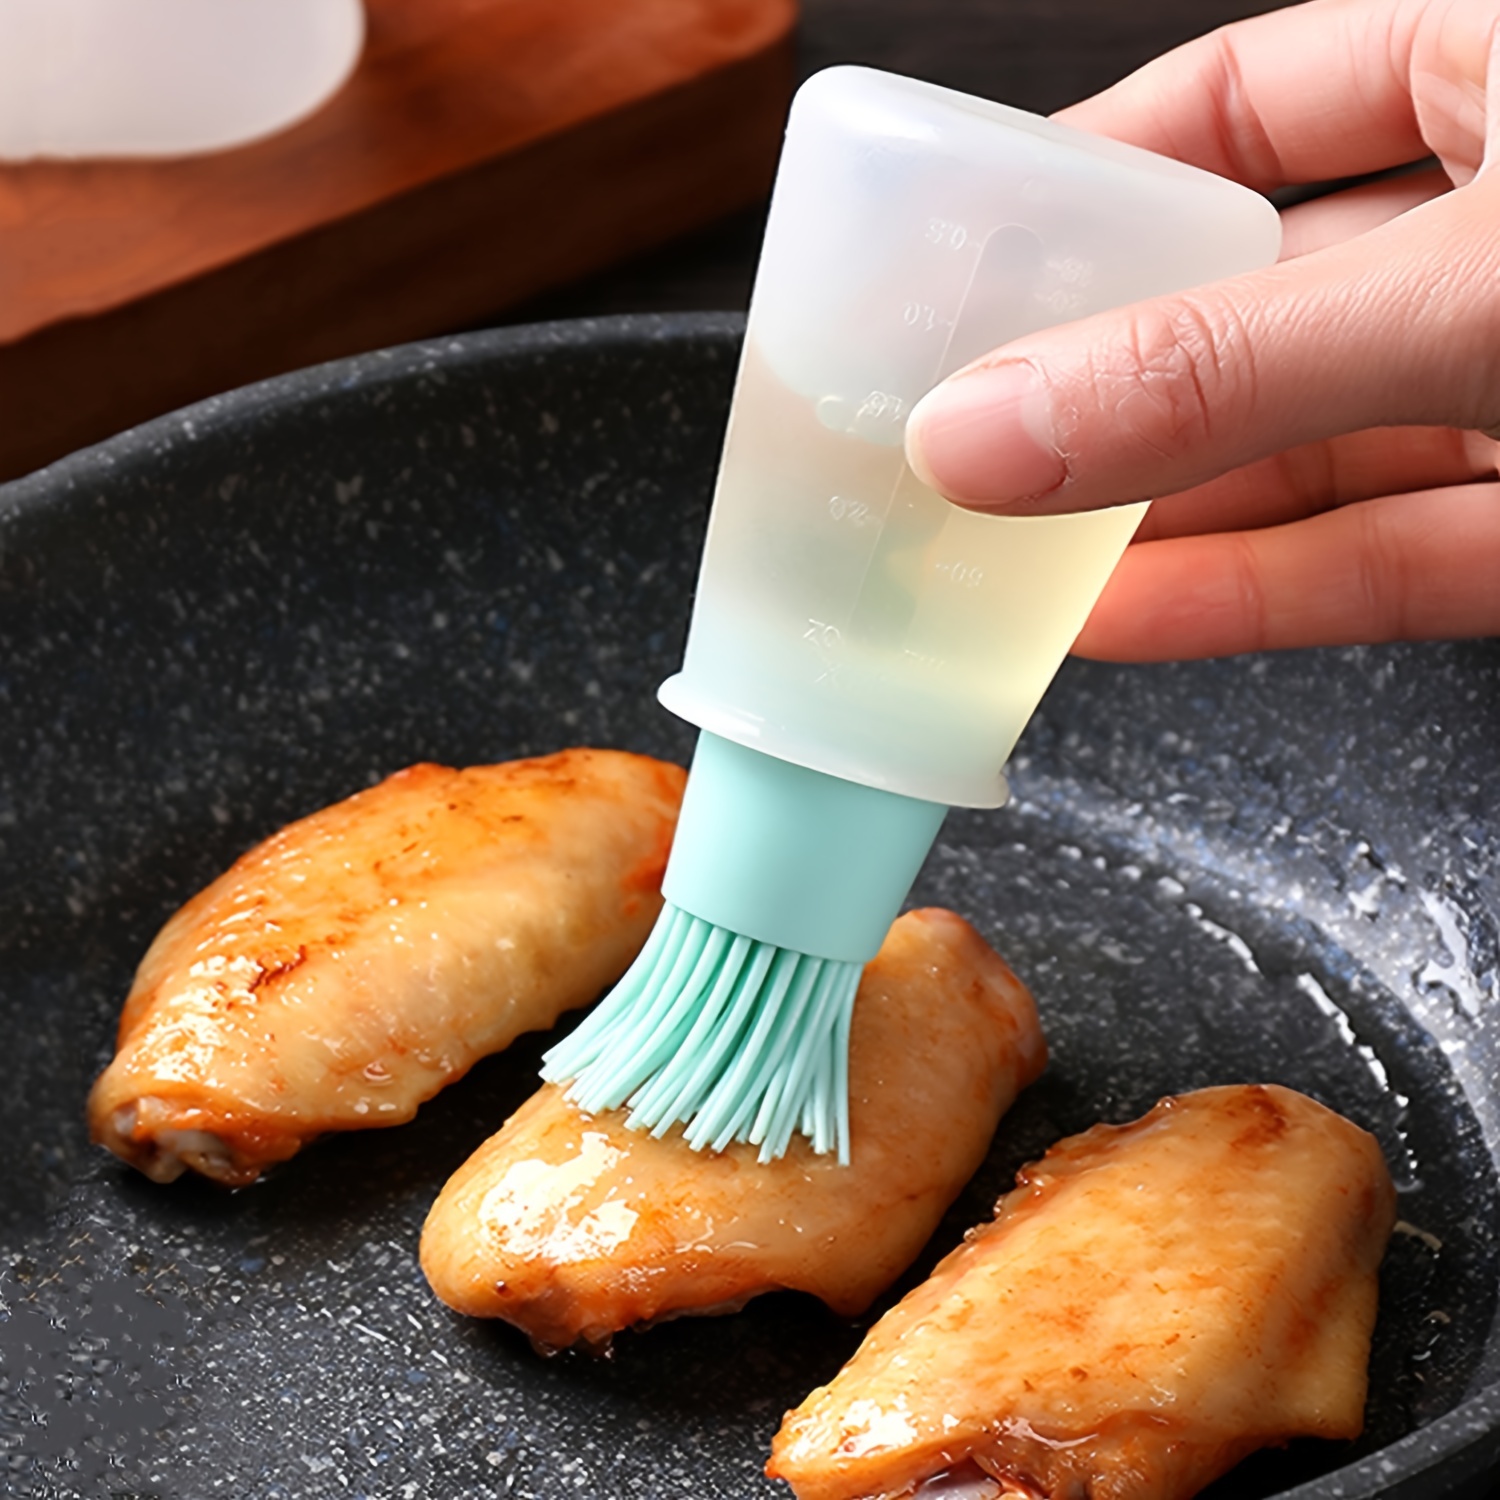 Unique Bargains Kitchenware Silicone Cooking Tool Baster Turkey Barbecue Pastry Brush Yellow